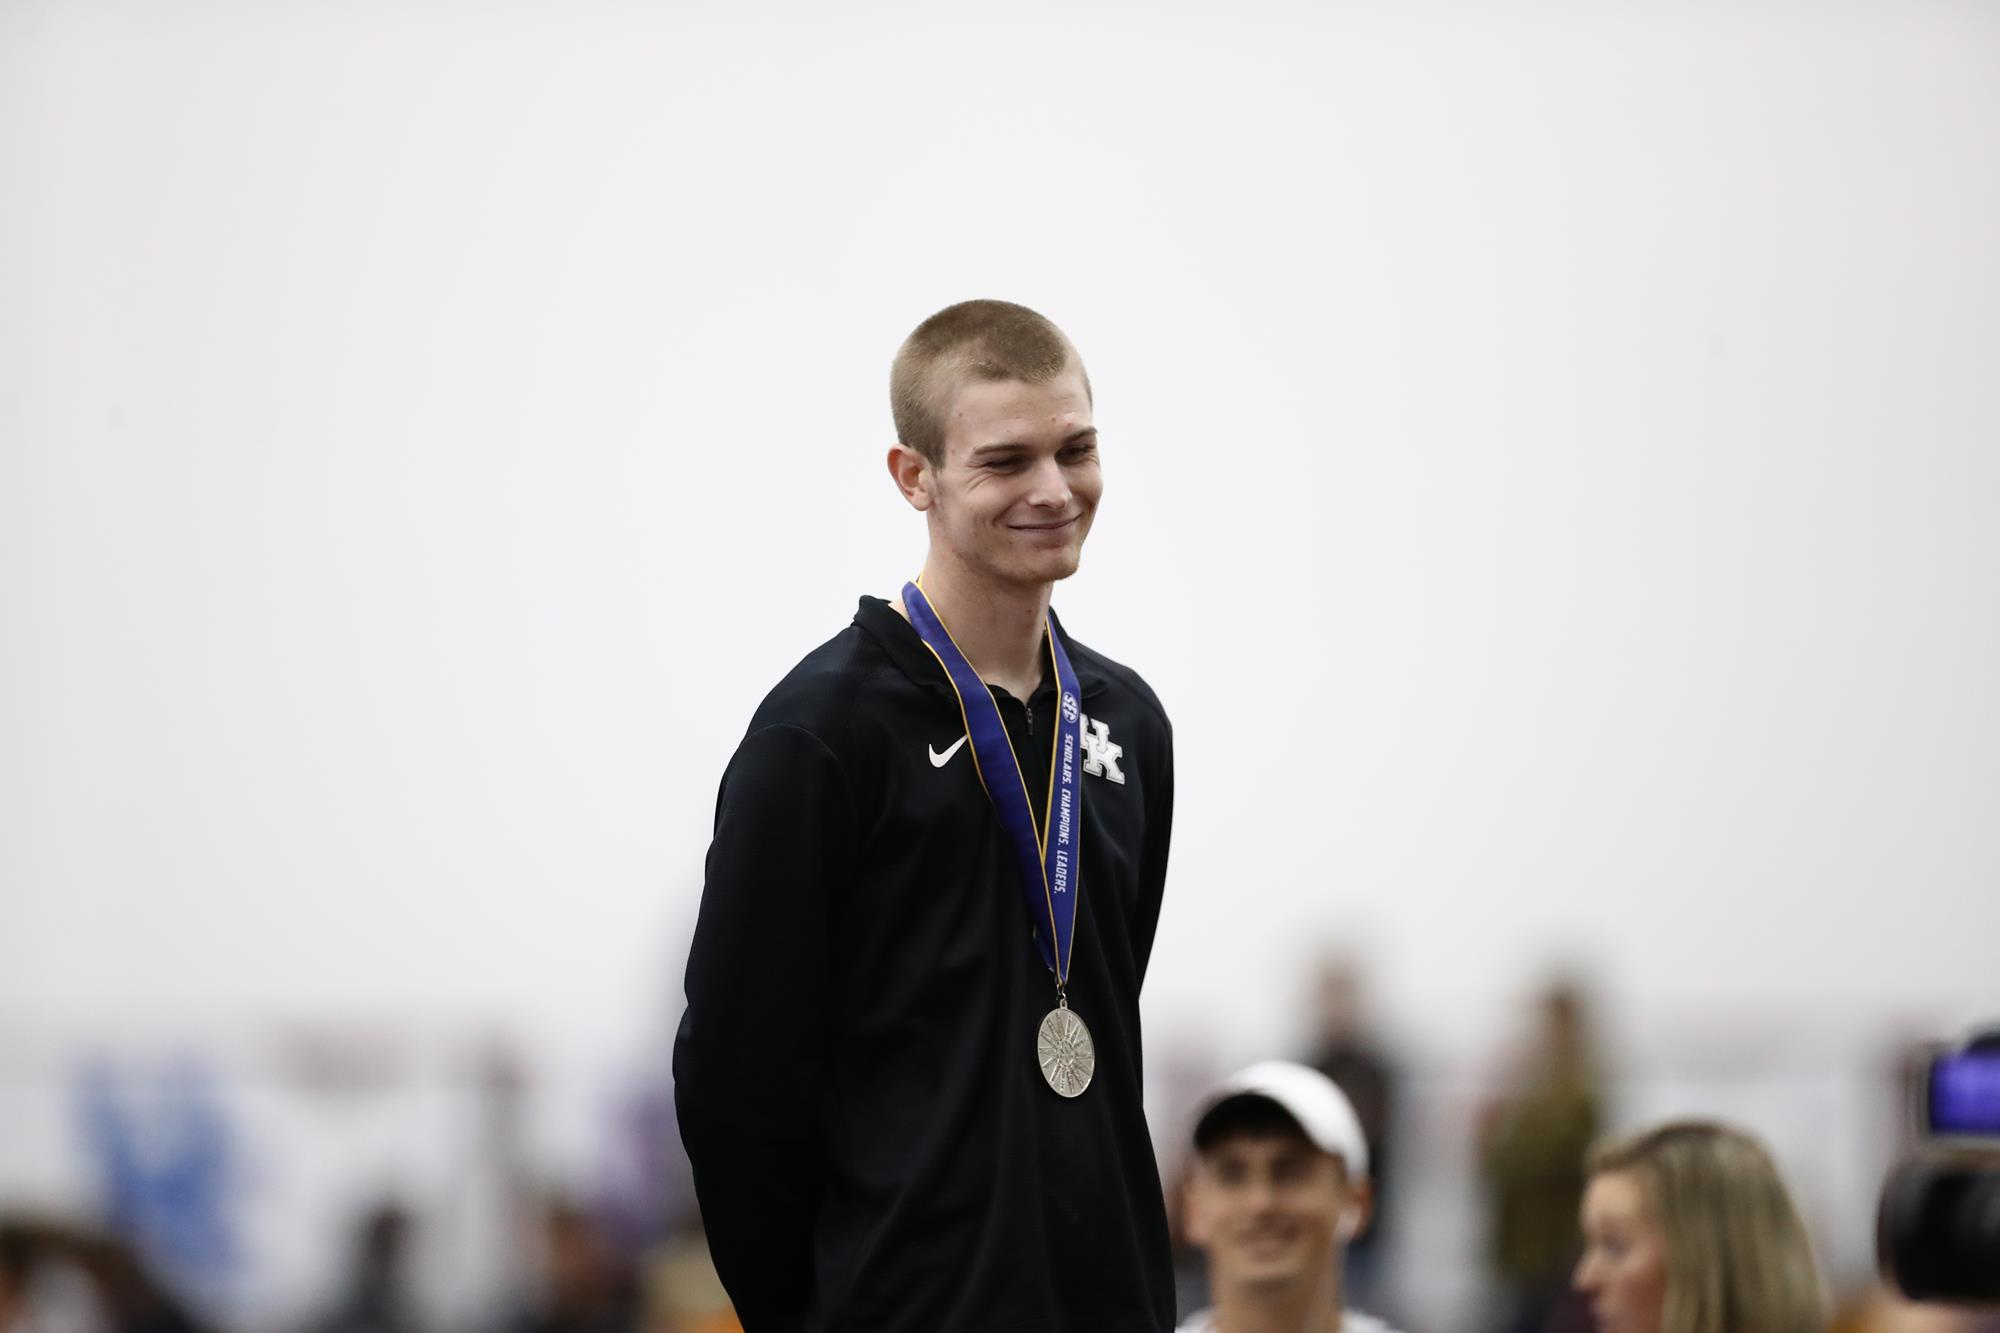 Matt Peare Earns Pole Vault Silver on Day One of SEC Championships